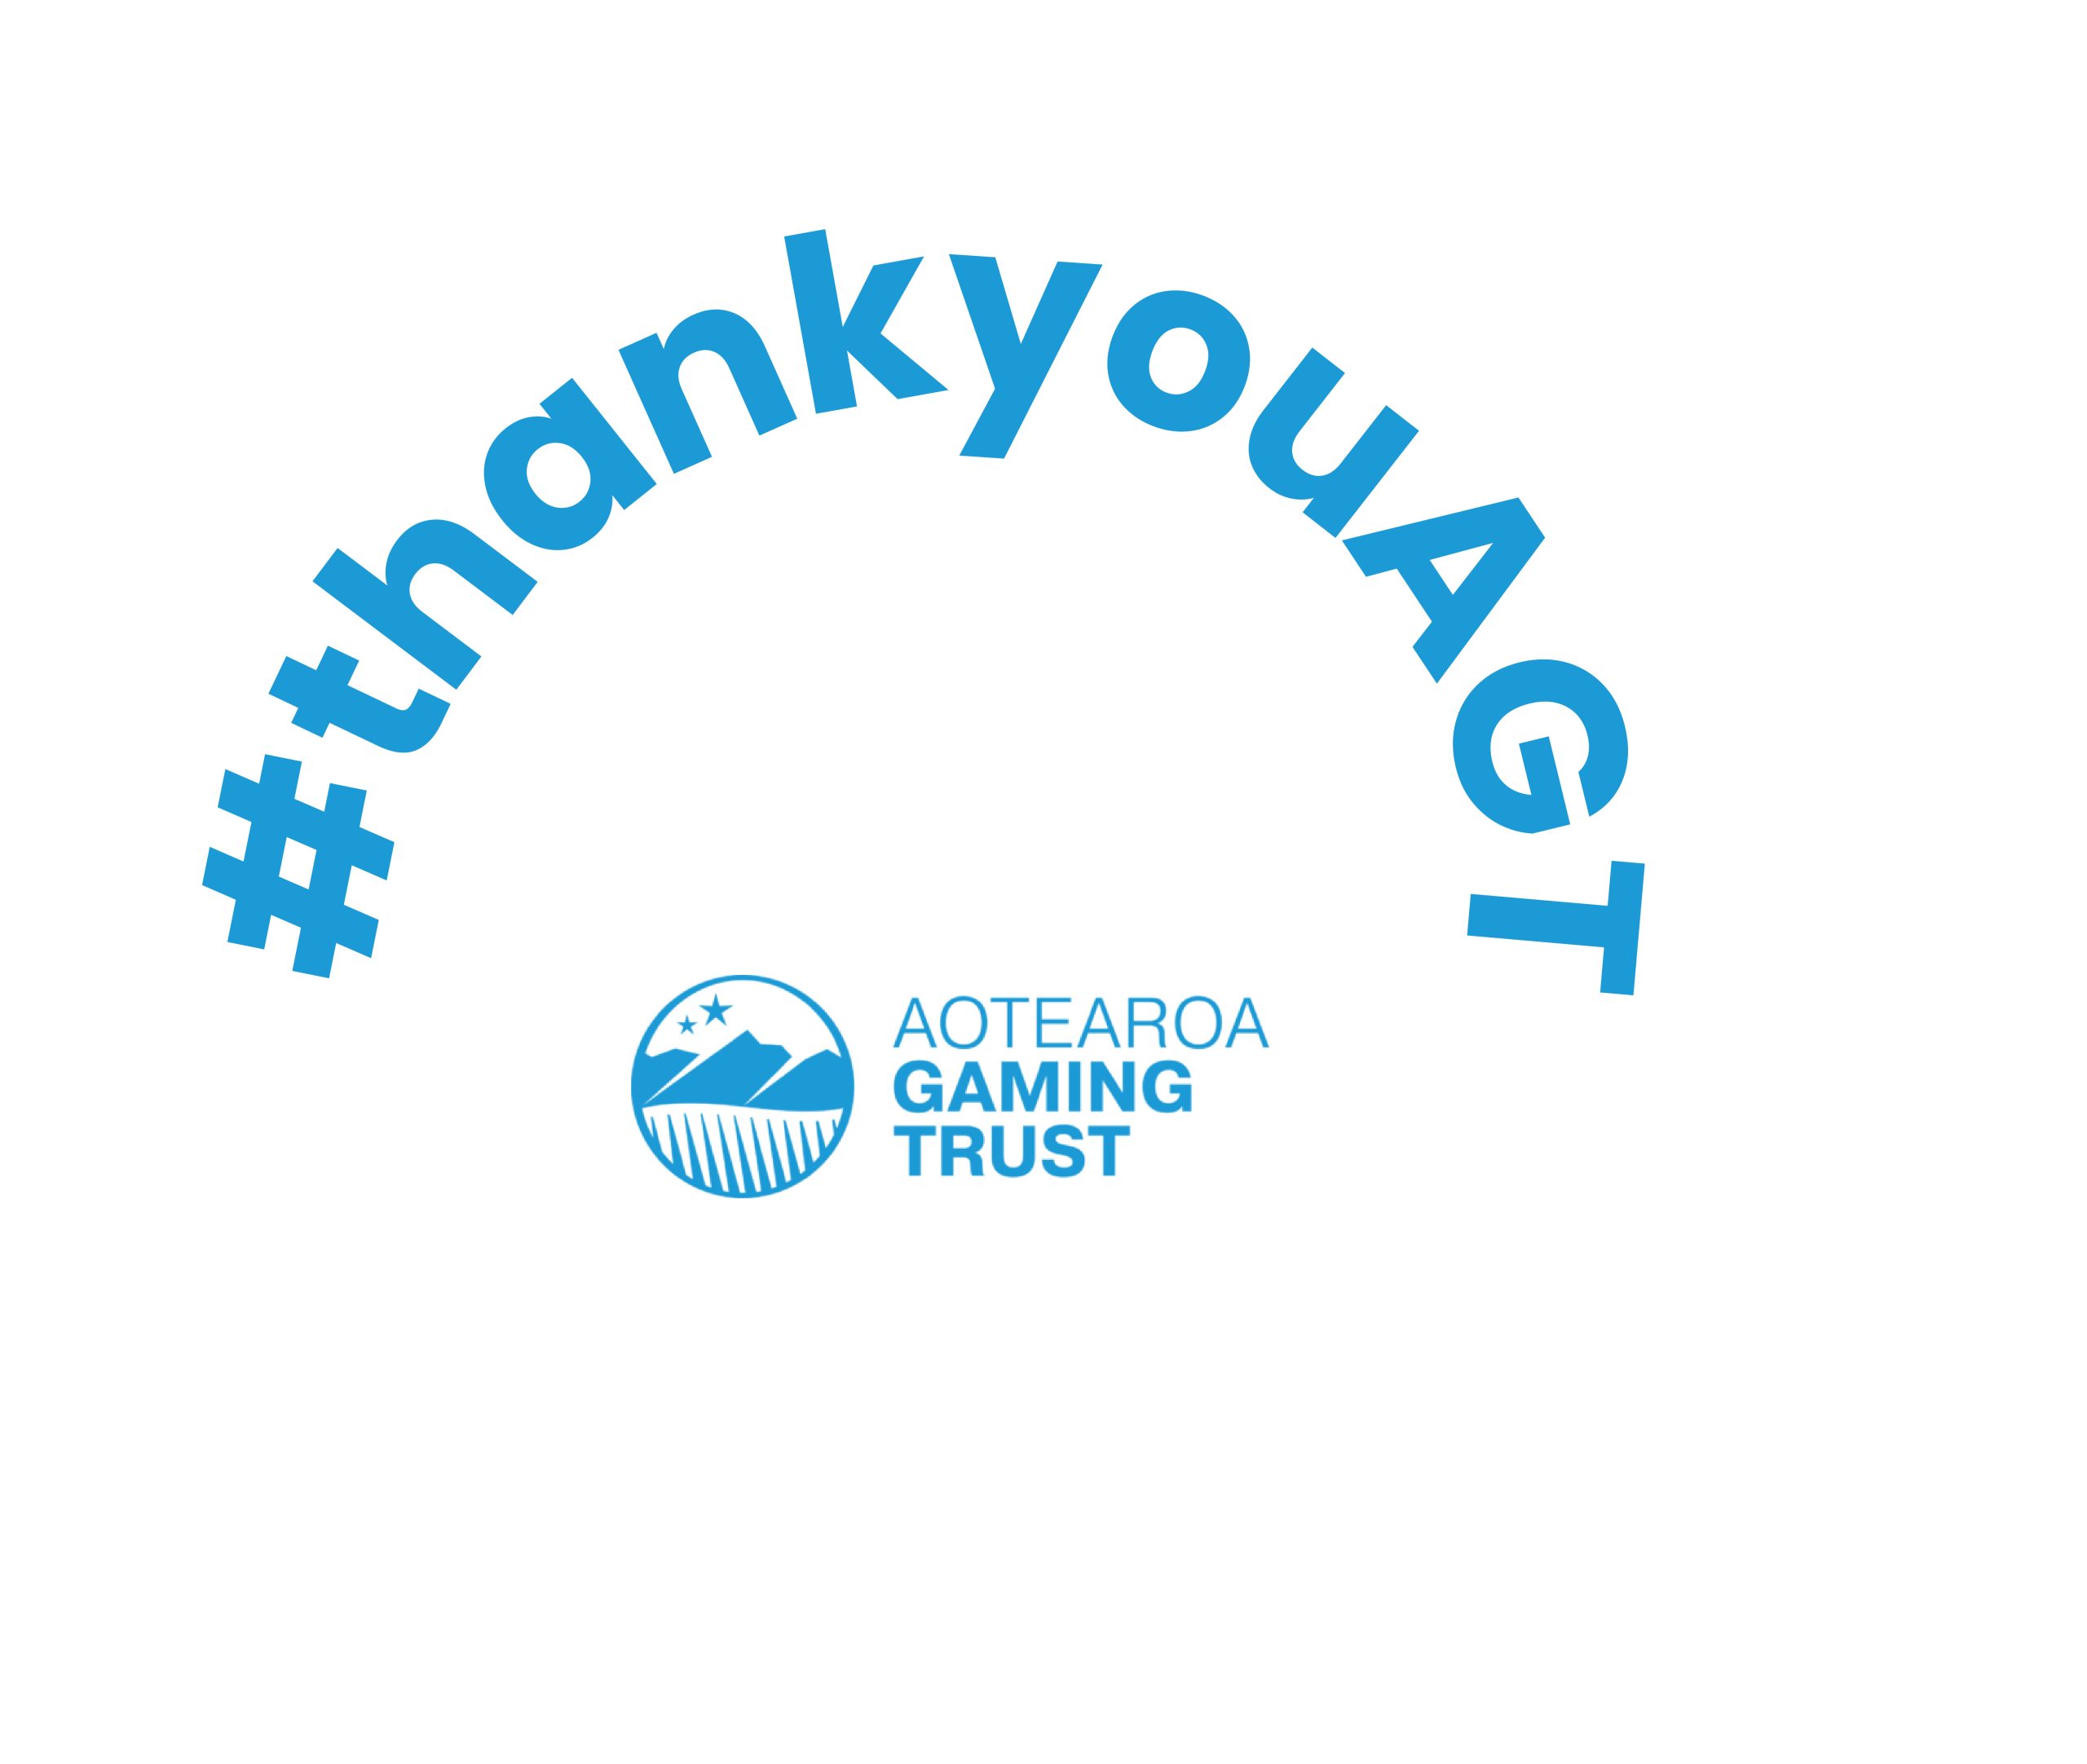 Featured Image for “Thank you Aotearoa Gaming Trust”